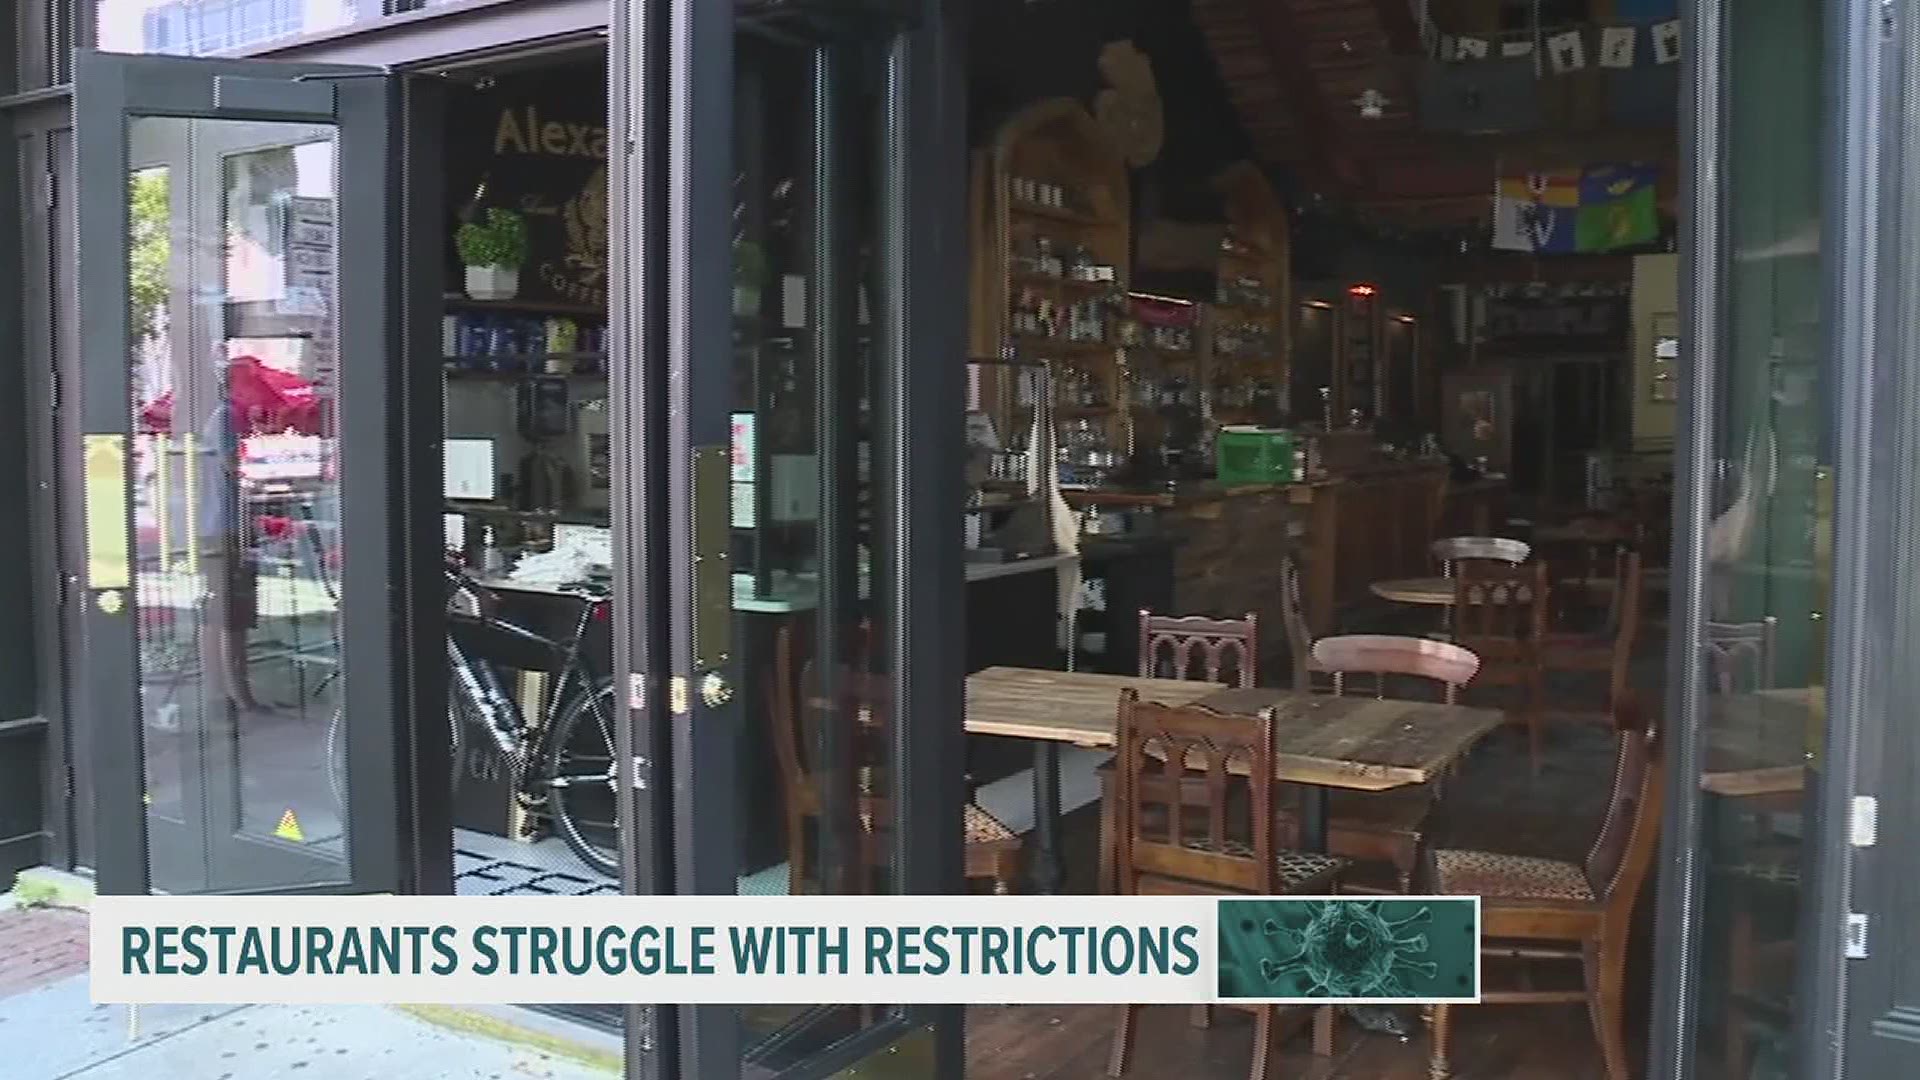 COVID-19 mitigation efforts are scheduled to come to an end in the commonwealth. That includes restrictions on restaurants, which have struggled to stay open.